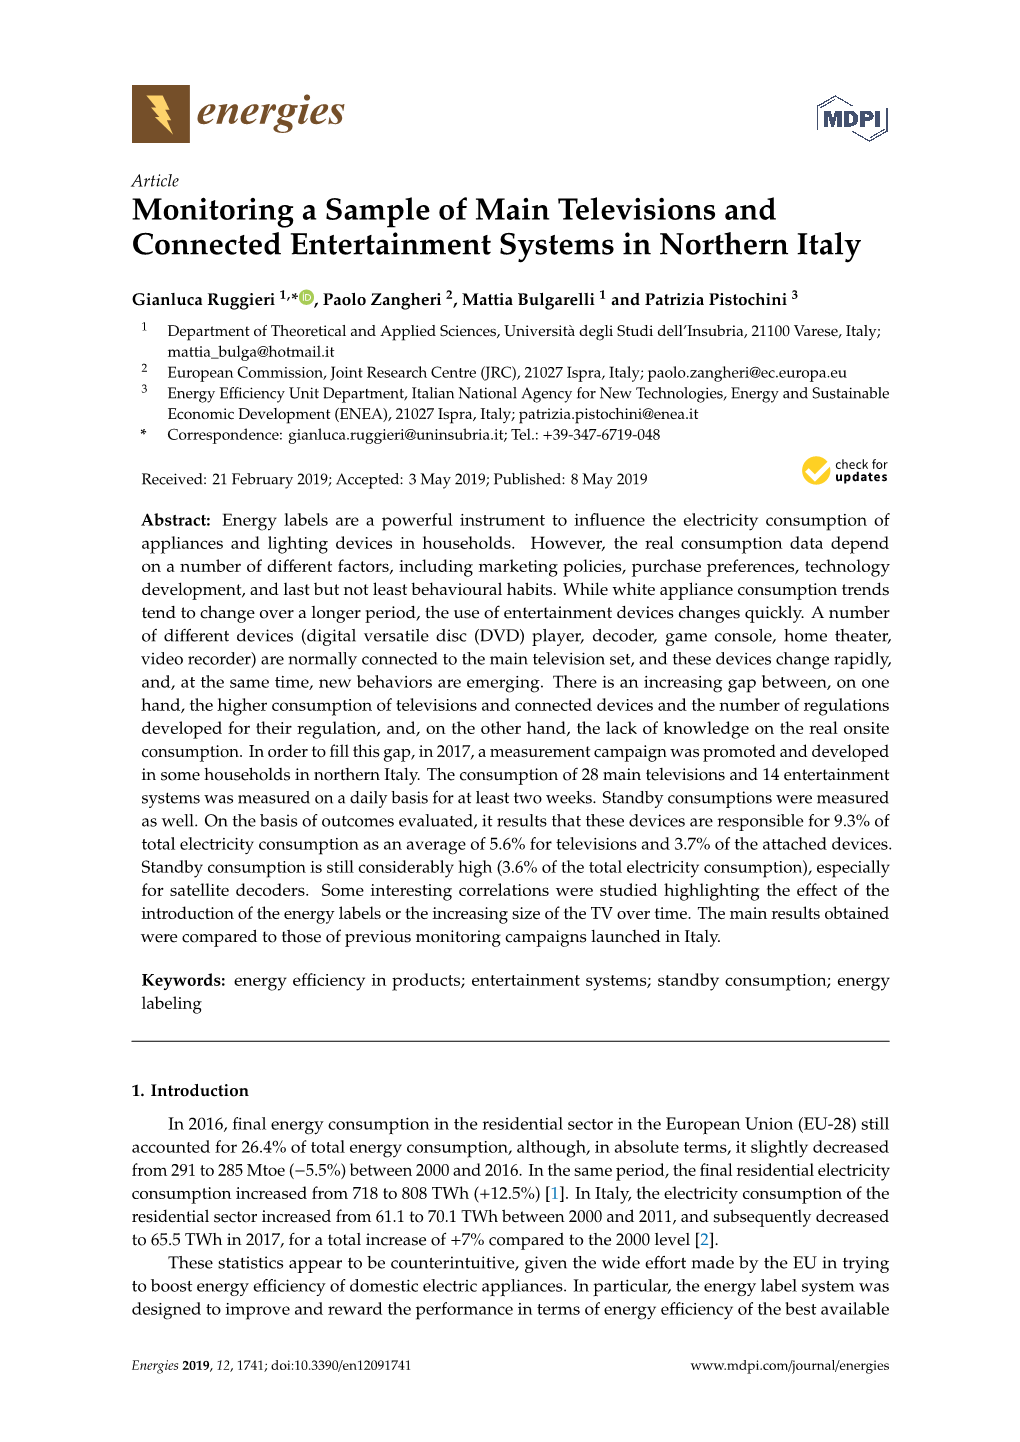 Monitoring a Sample of Main Televisions and Connected Entertainment Systems in Northern Italy